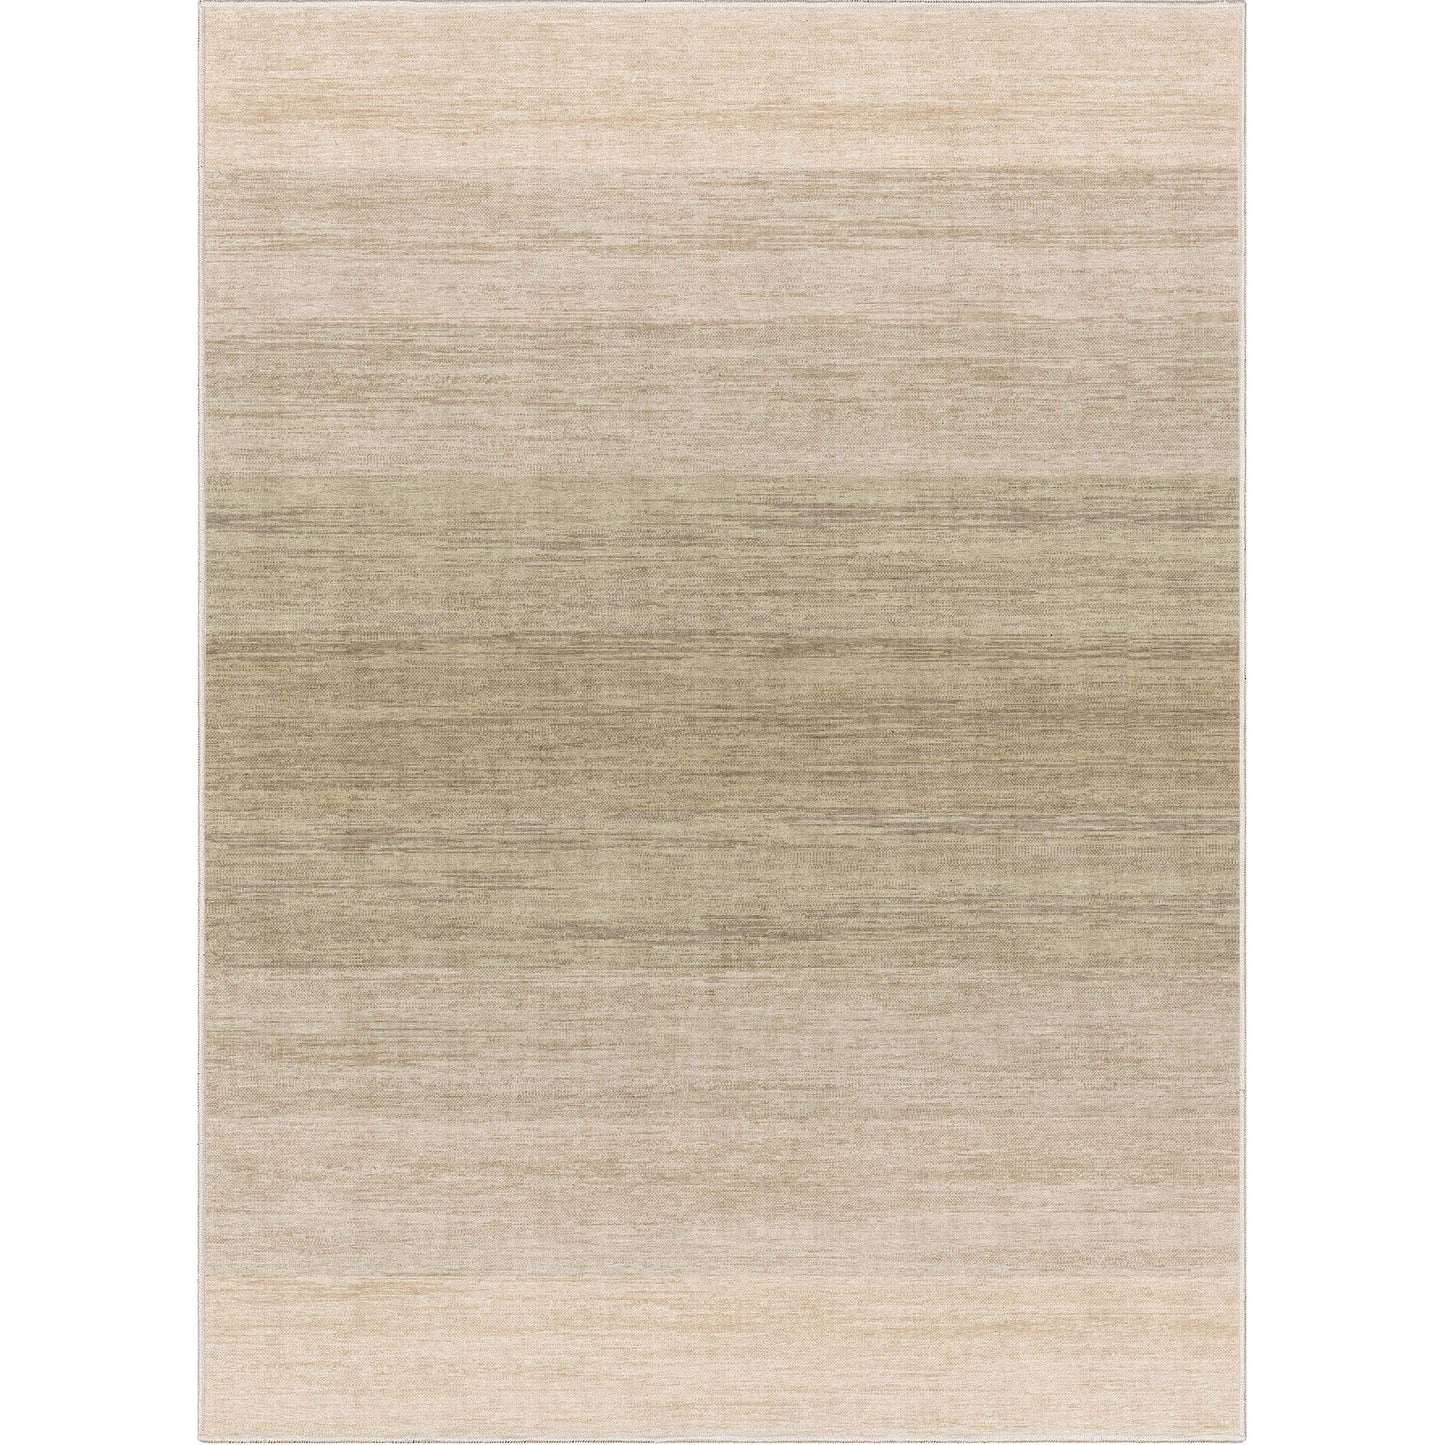 Abstract Sunset Beige Green Rug W-AB-33A